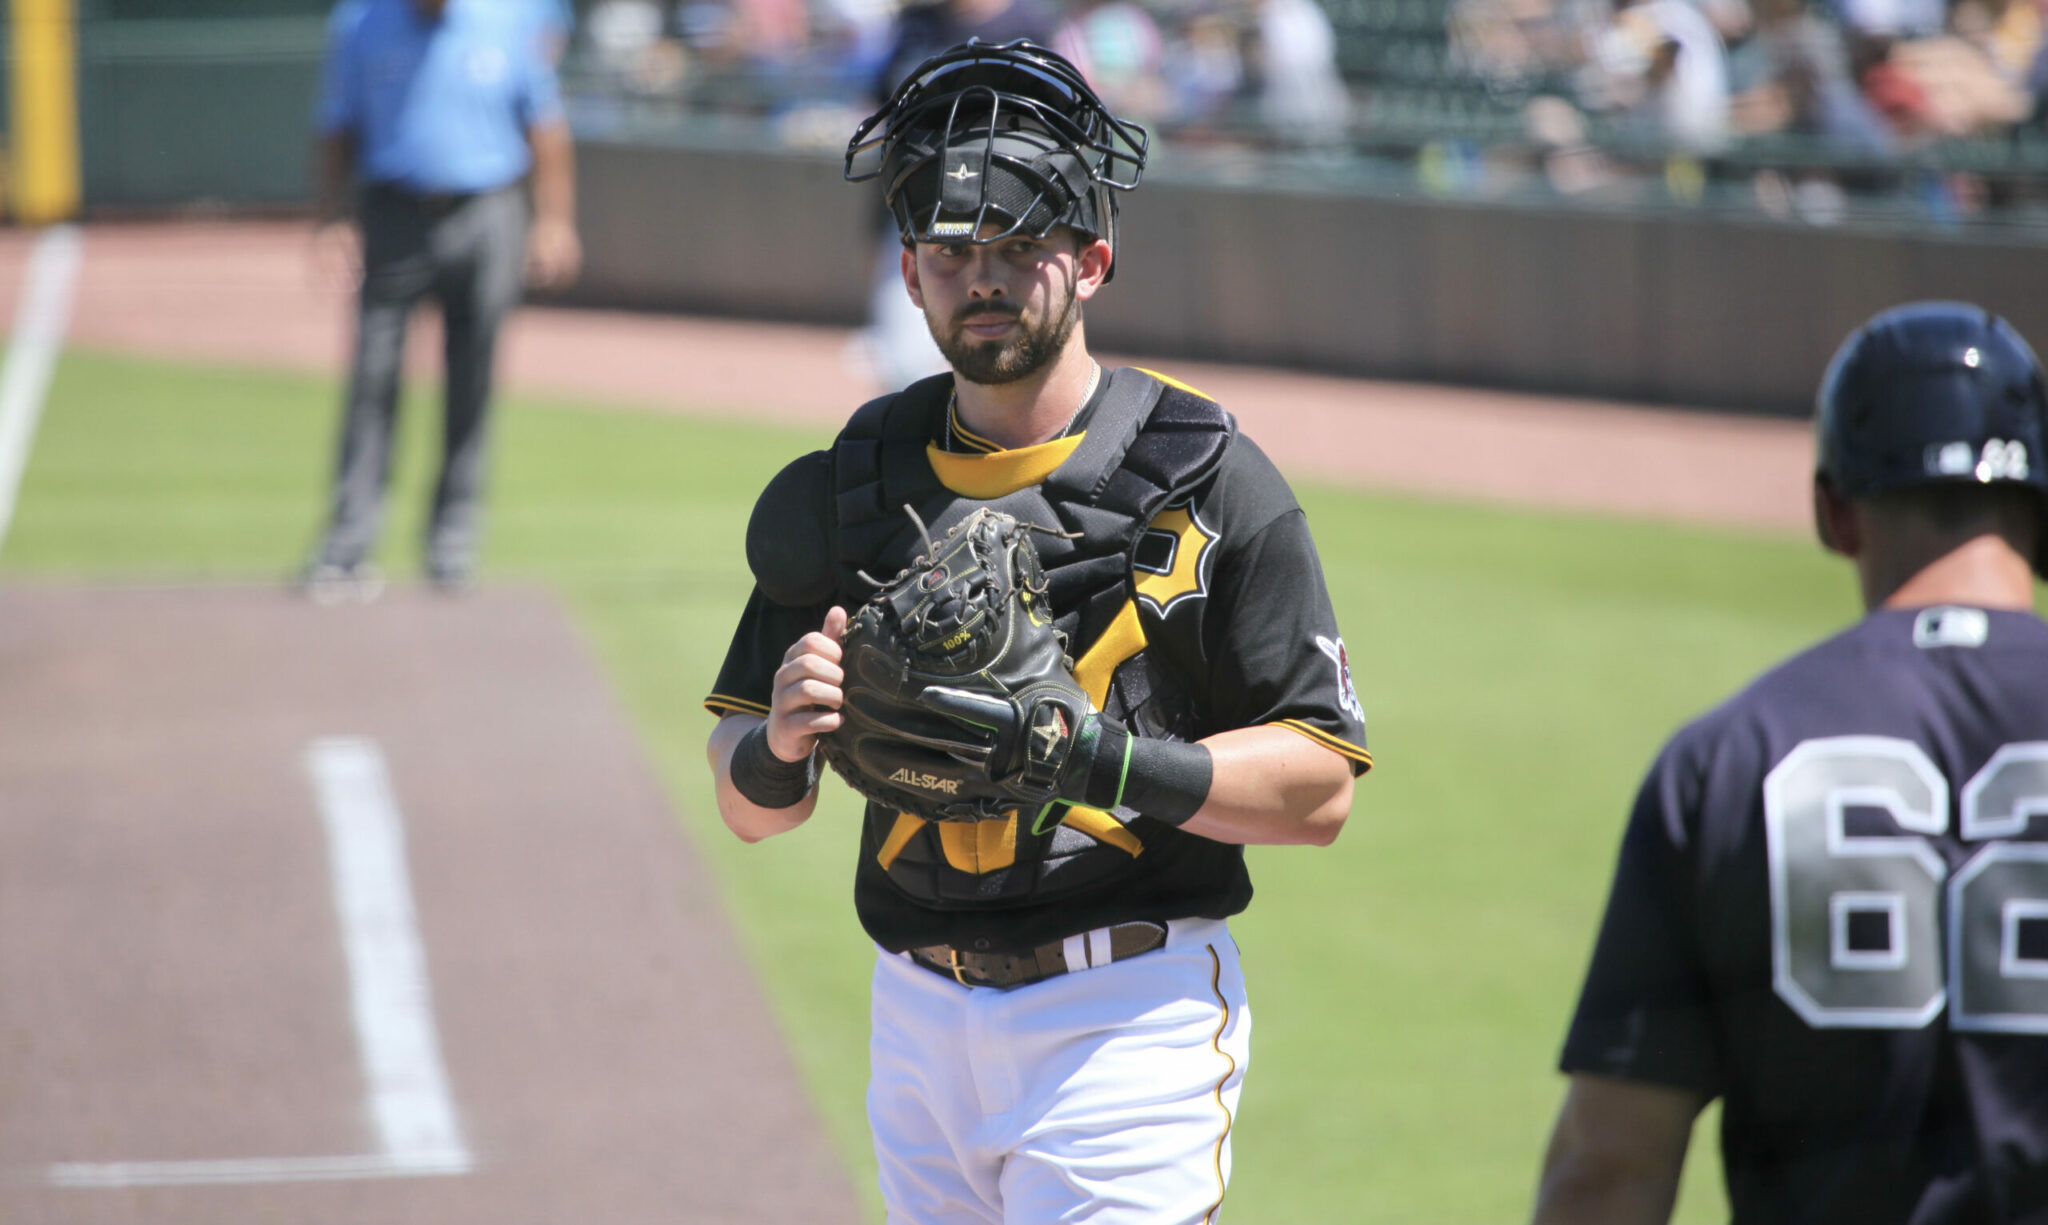 Pirates Prospects Daily: Carter Bins Looking To Find Place In Crowded Catcher Picture